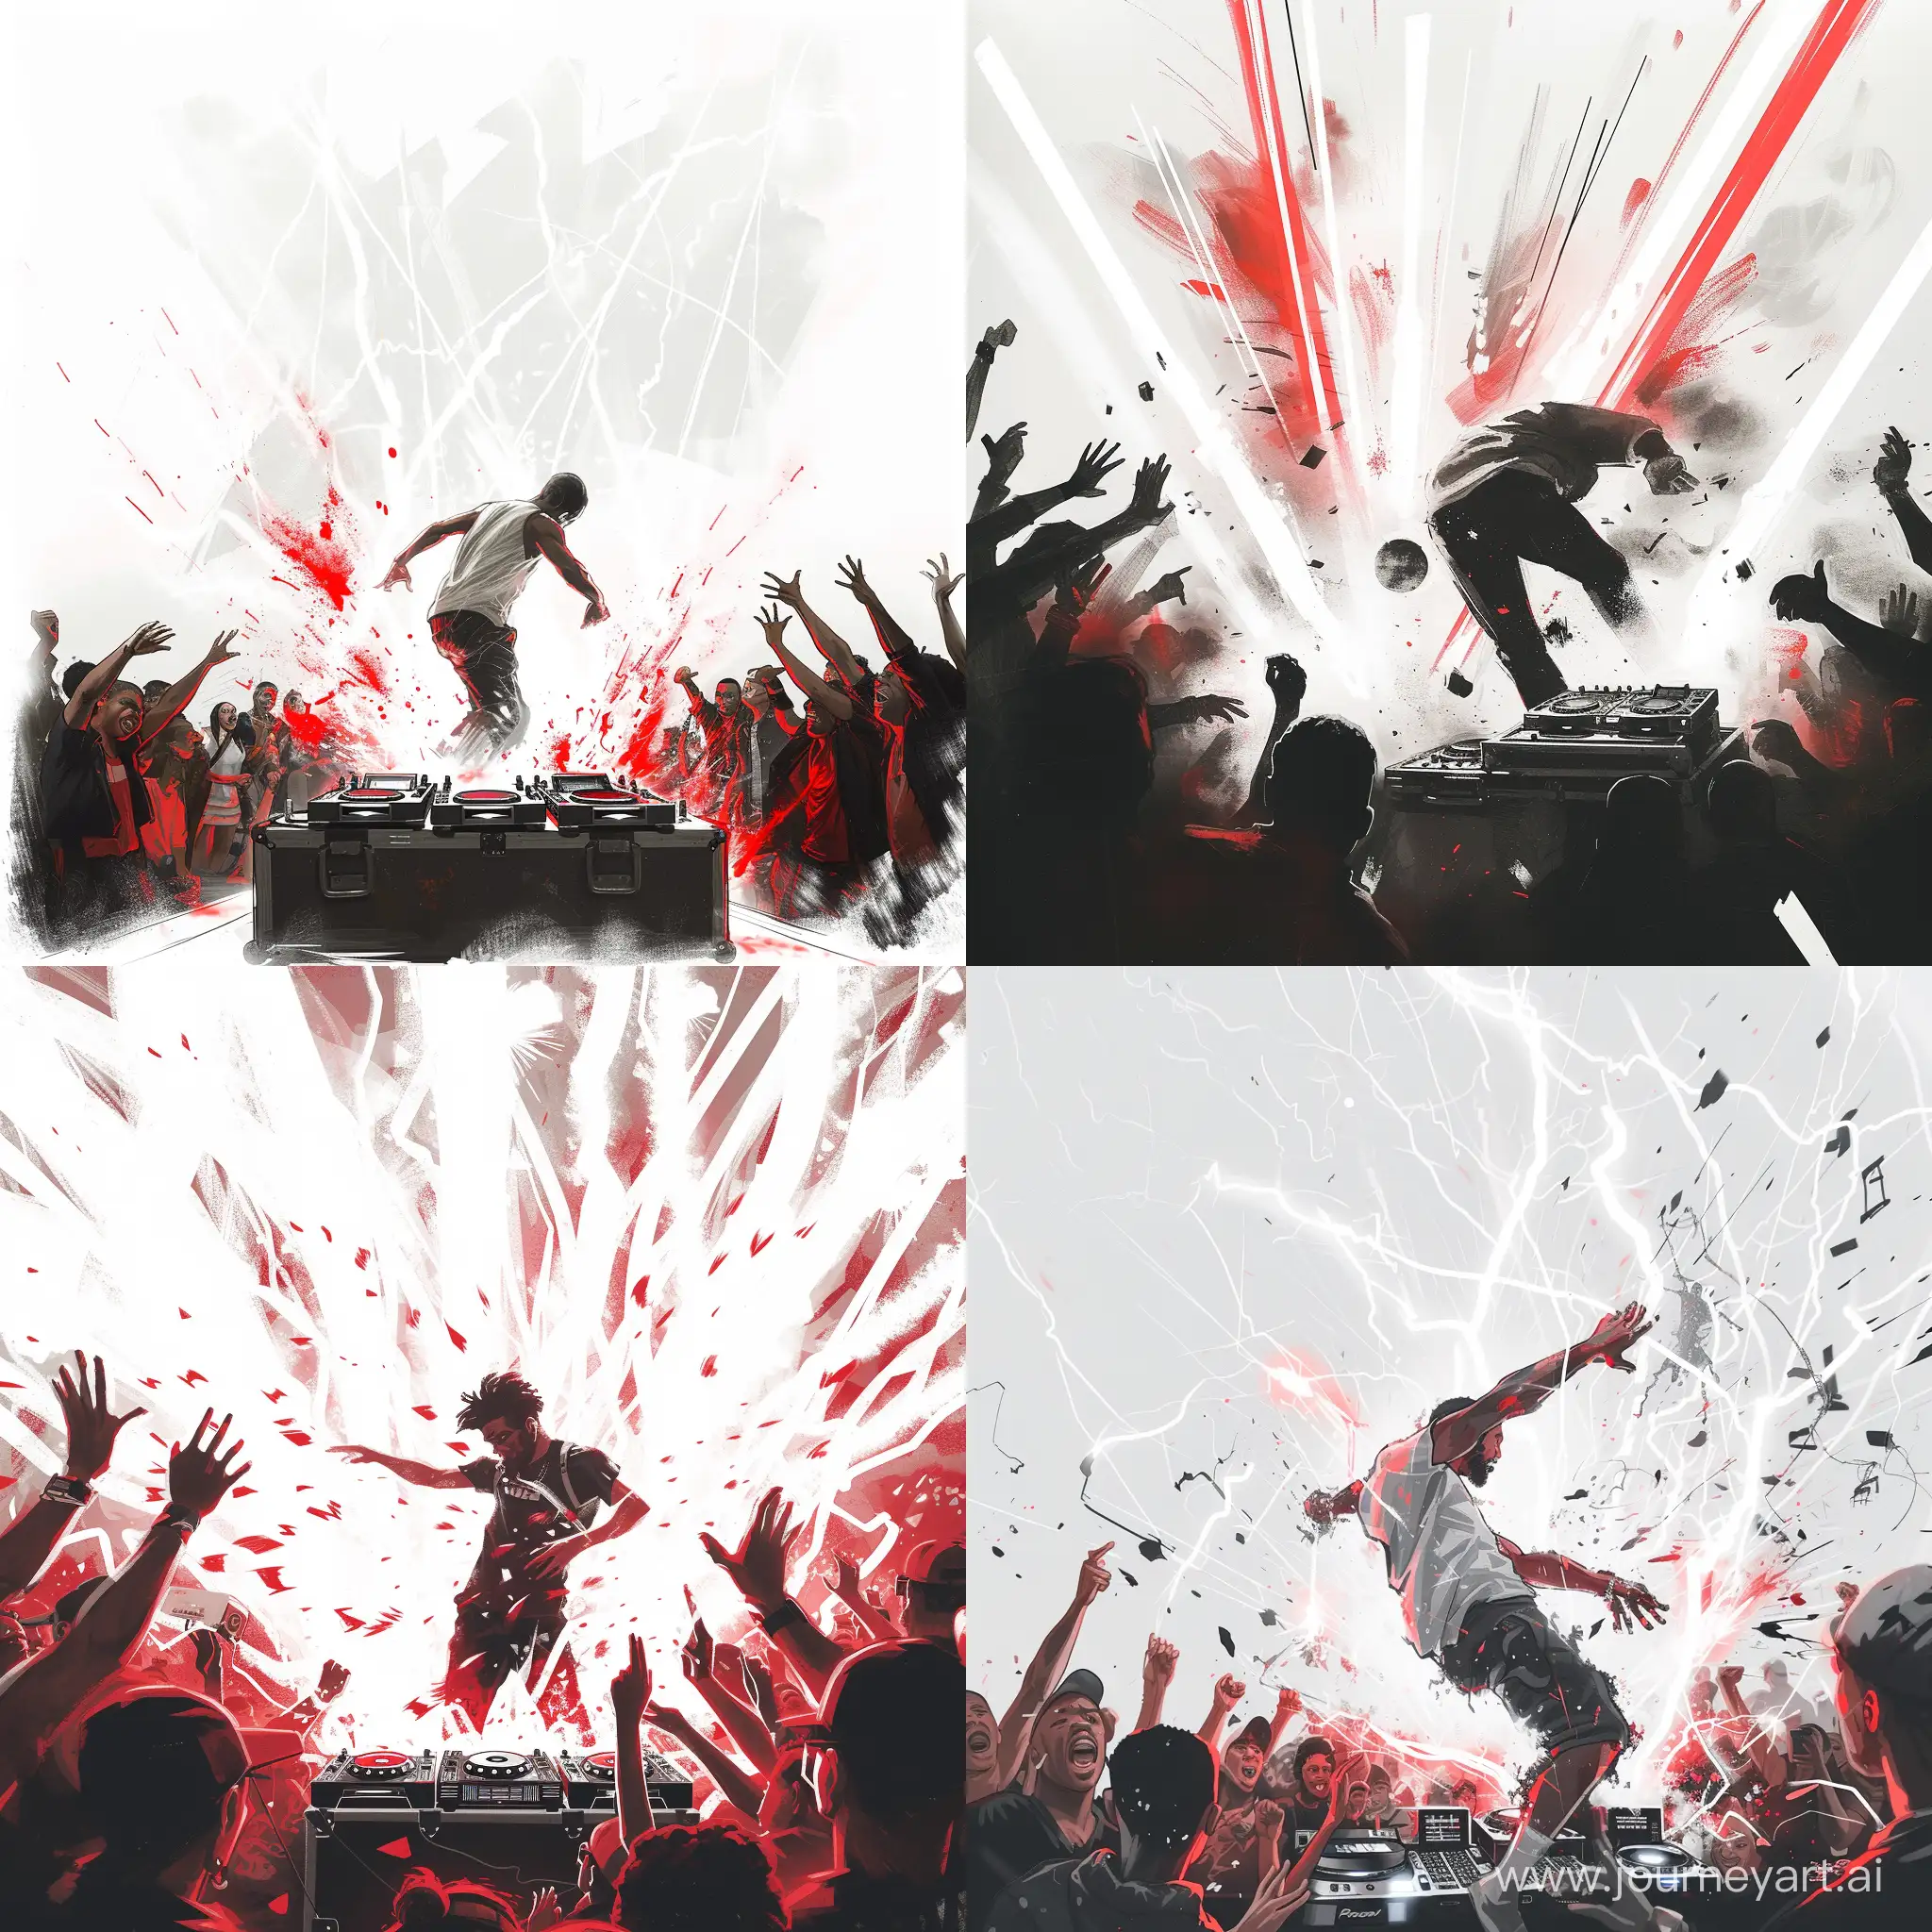 He makes an art based on a breaking dance battle, with a cheering audience, a DJ, and white and red effect lights. with a white background.